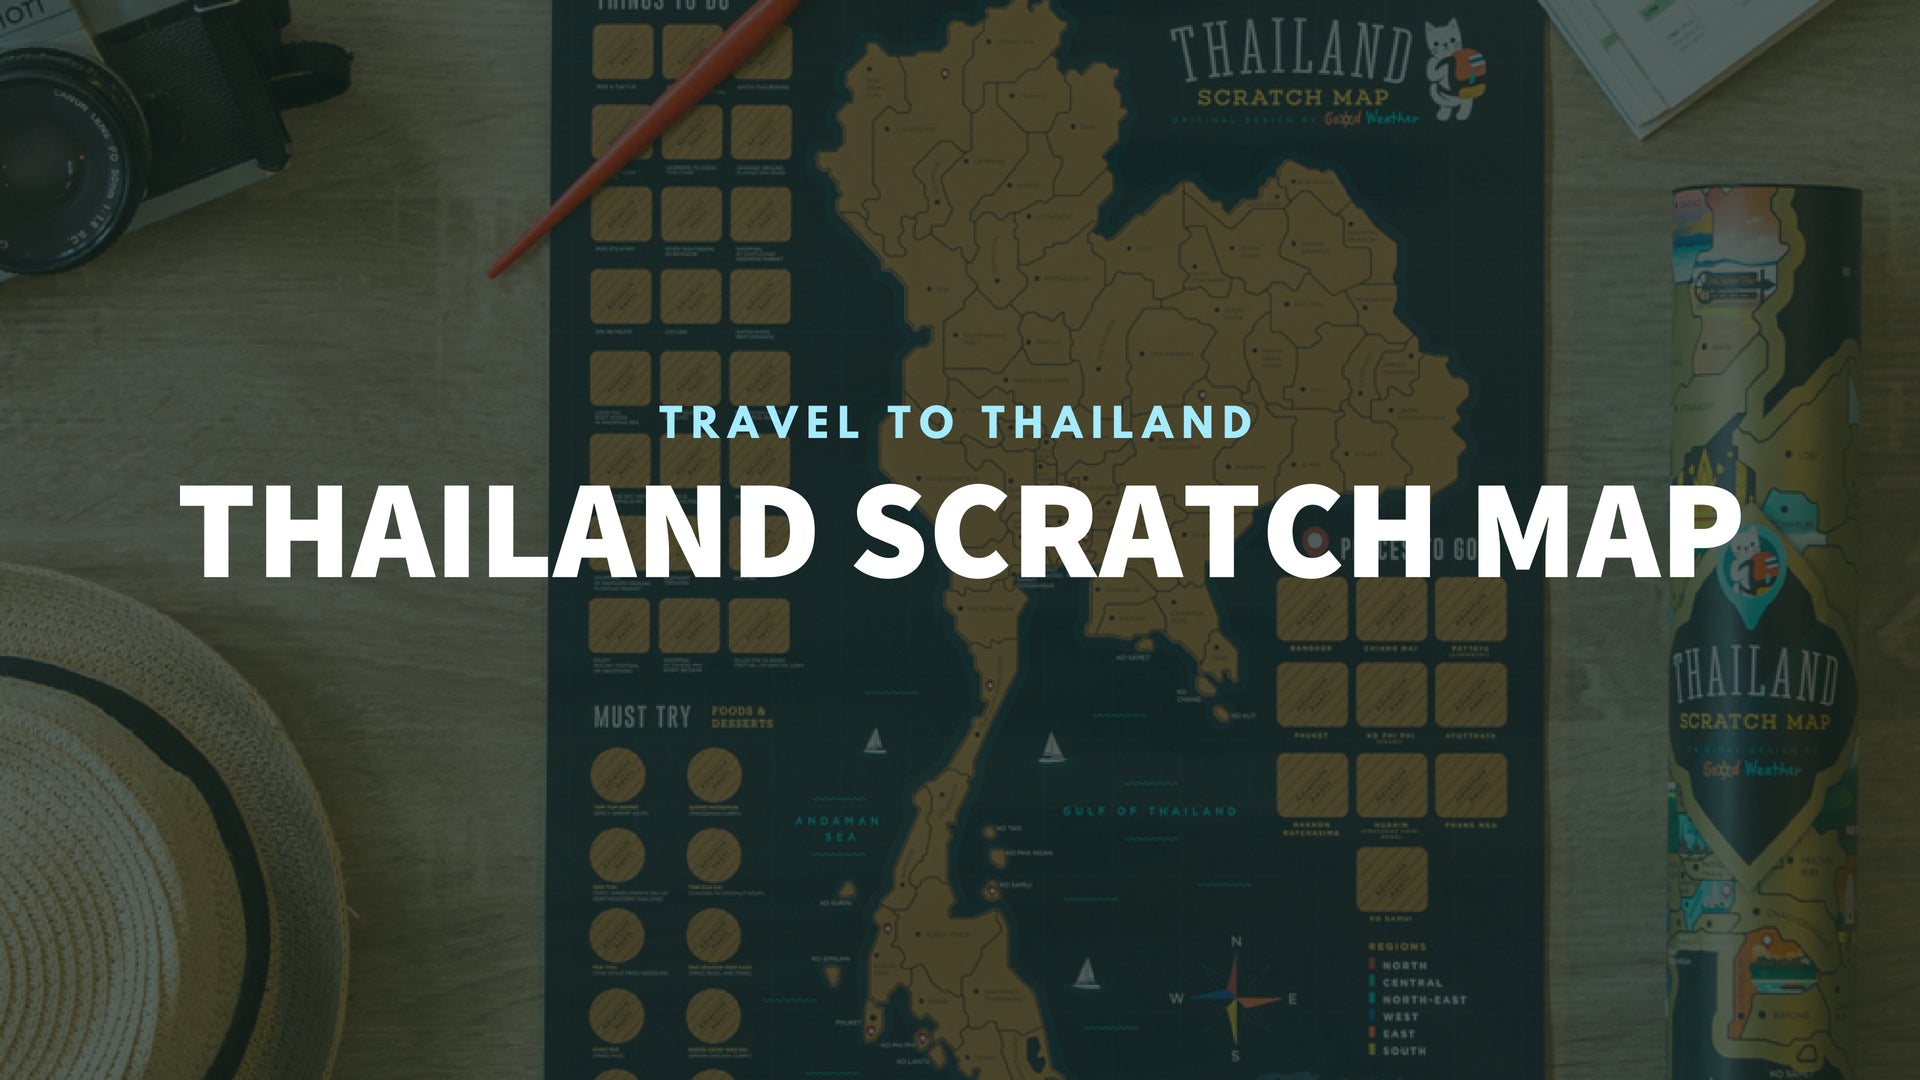 Thailand Scratch Travel Map with Frame Good Weather Travel to Thailand deluxe luckies world travel map with pins europe uk rosegold small personalised Scratch Off Traveling Thailand travelization 泰國 刮刮地圖 刮刮樂 世界地圖 banner - GadgetiCloud